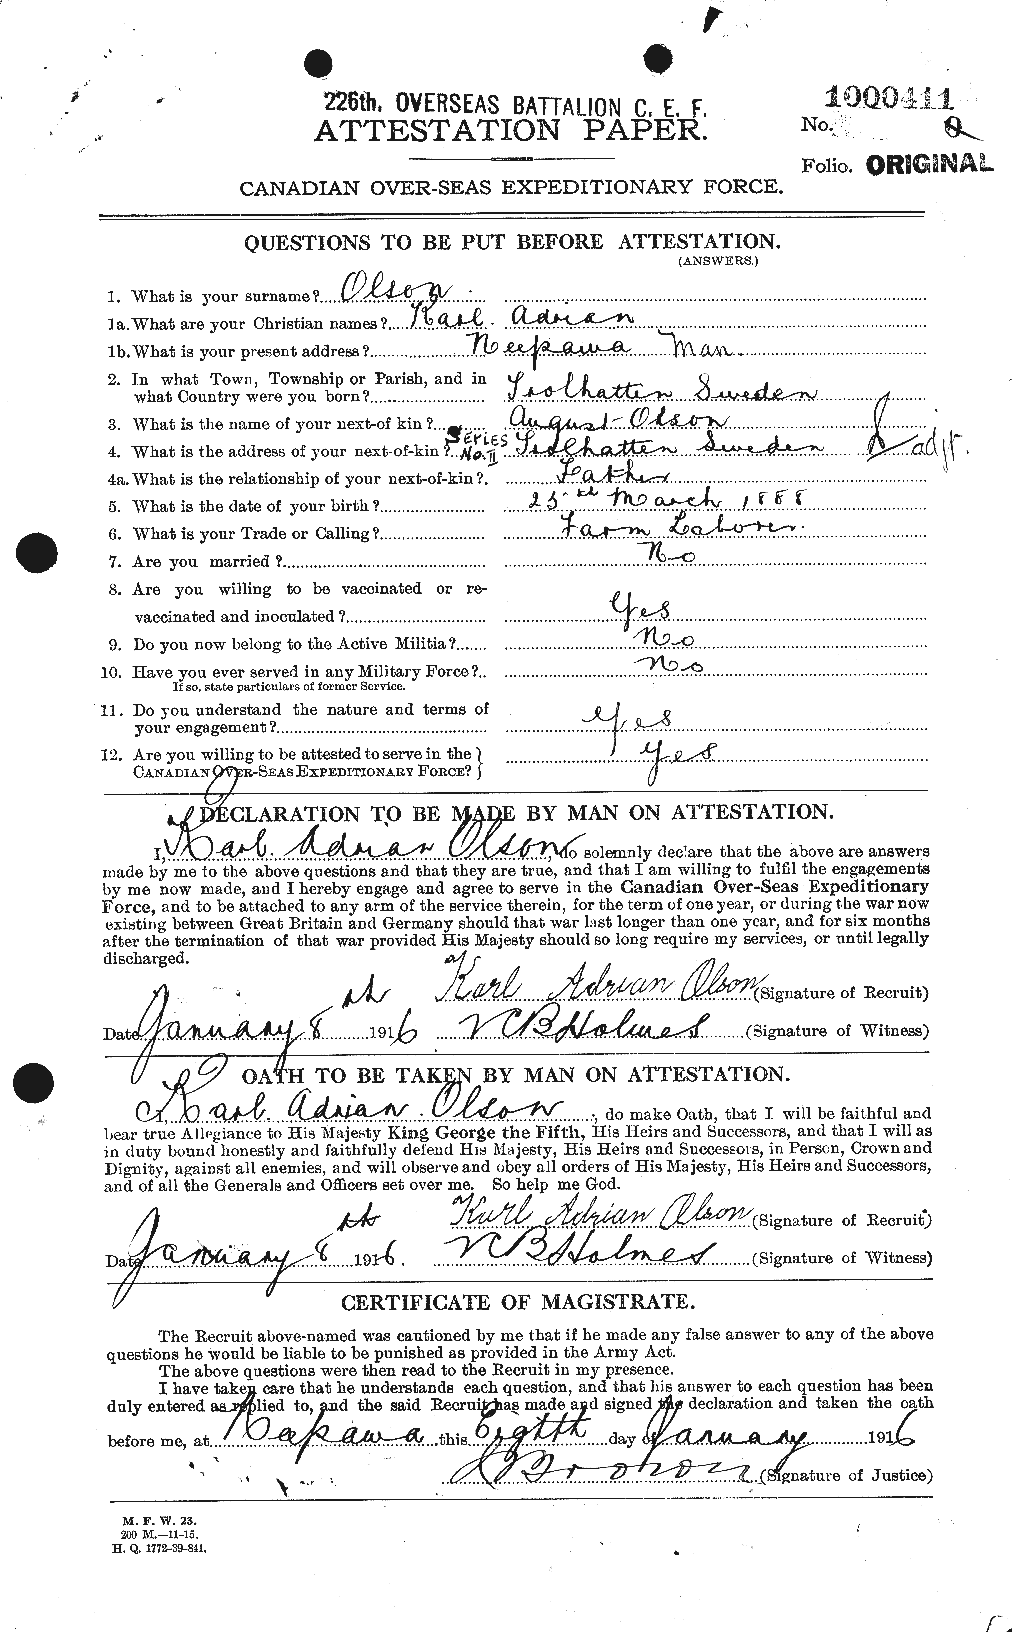 Personnel Records of the First World War - CEF 557245a